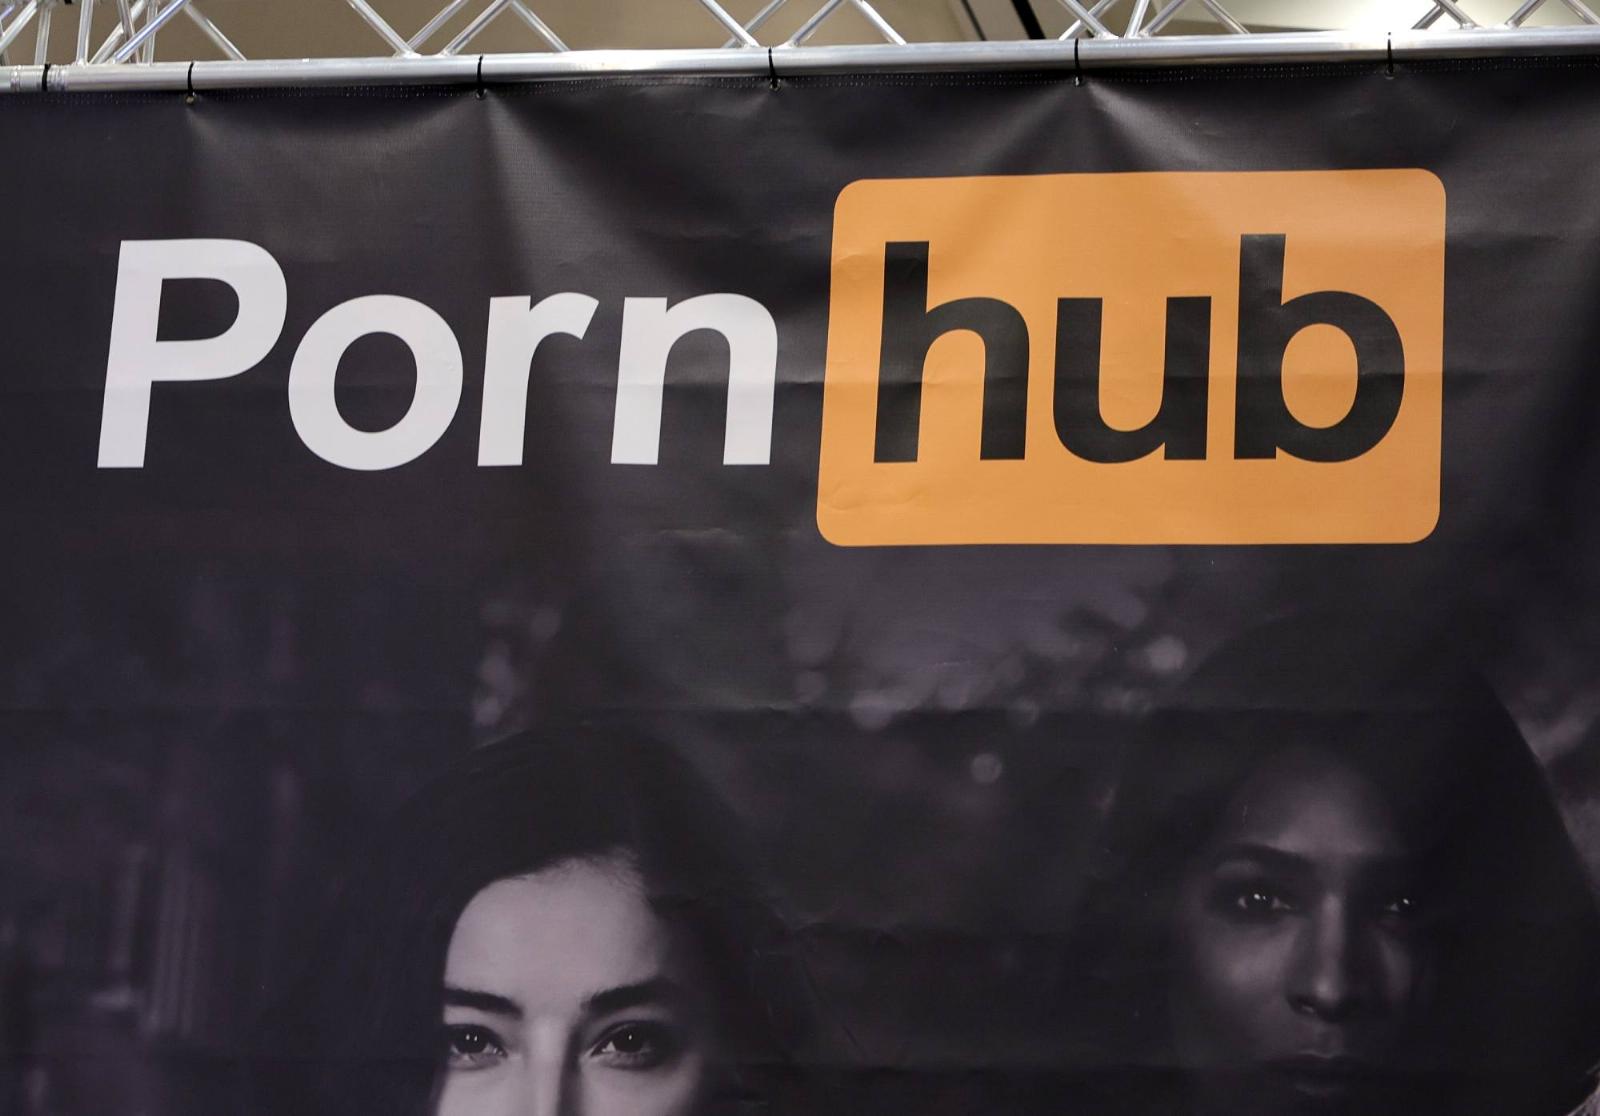 Pornhub owner MindGeek sold to private equity firm